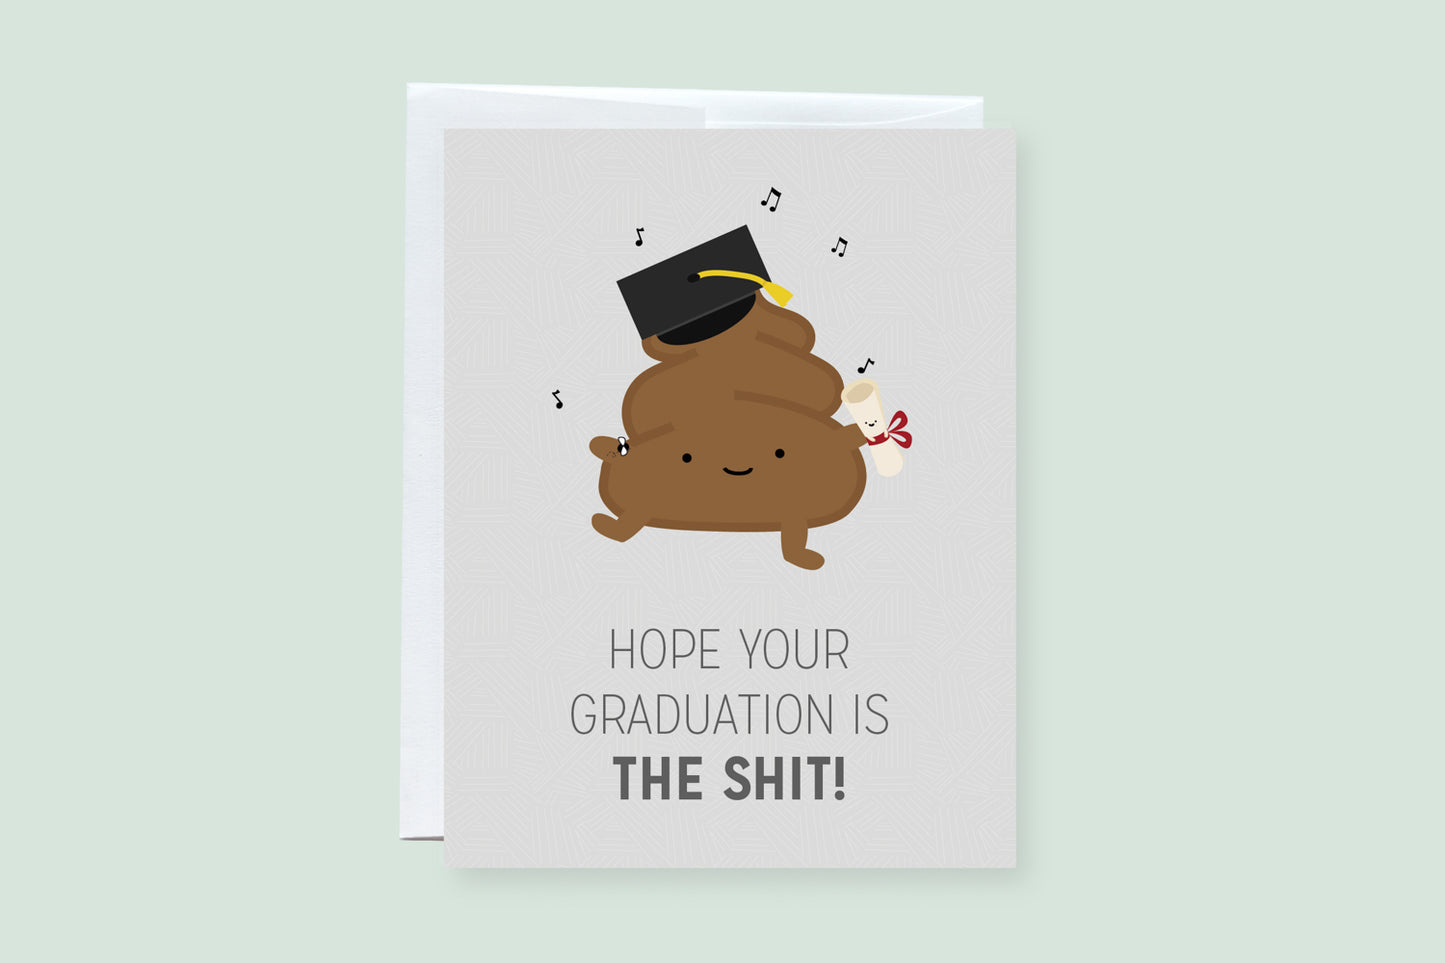 Graduation Poop (The Shit) Punny Greeting Card